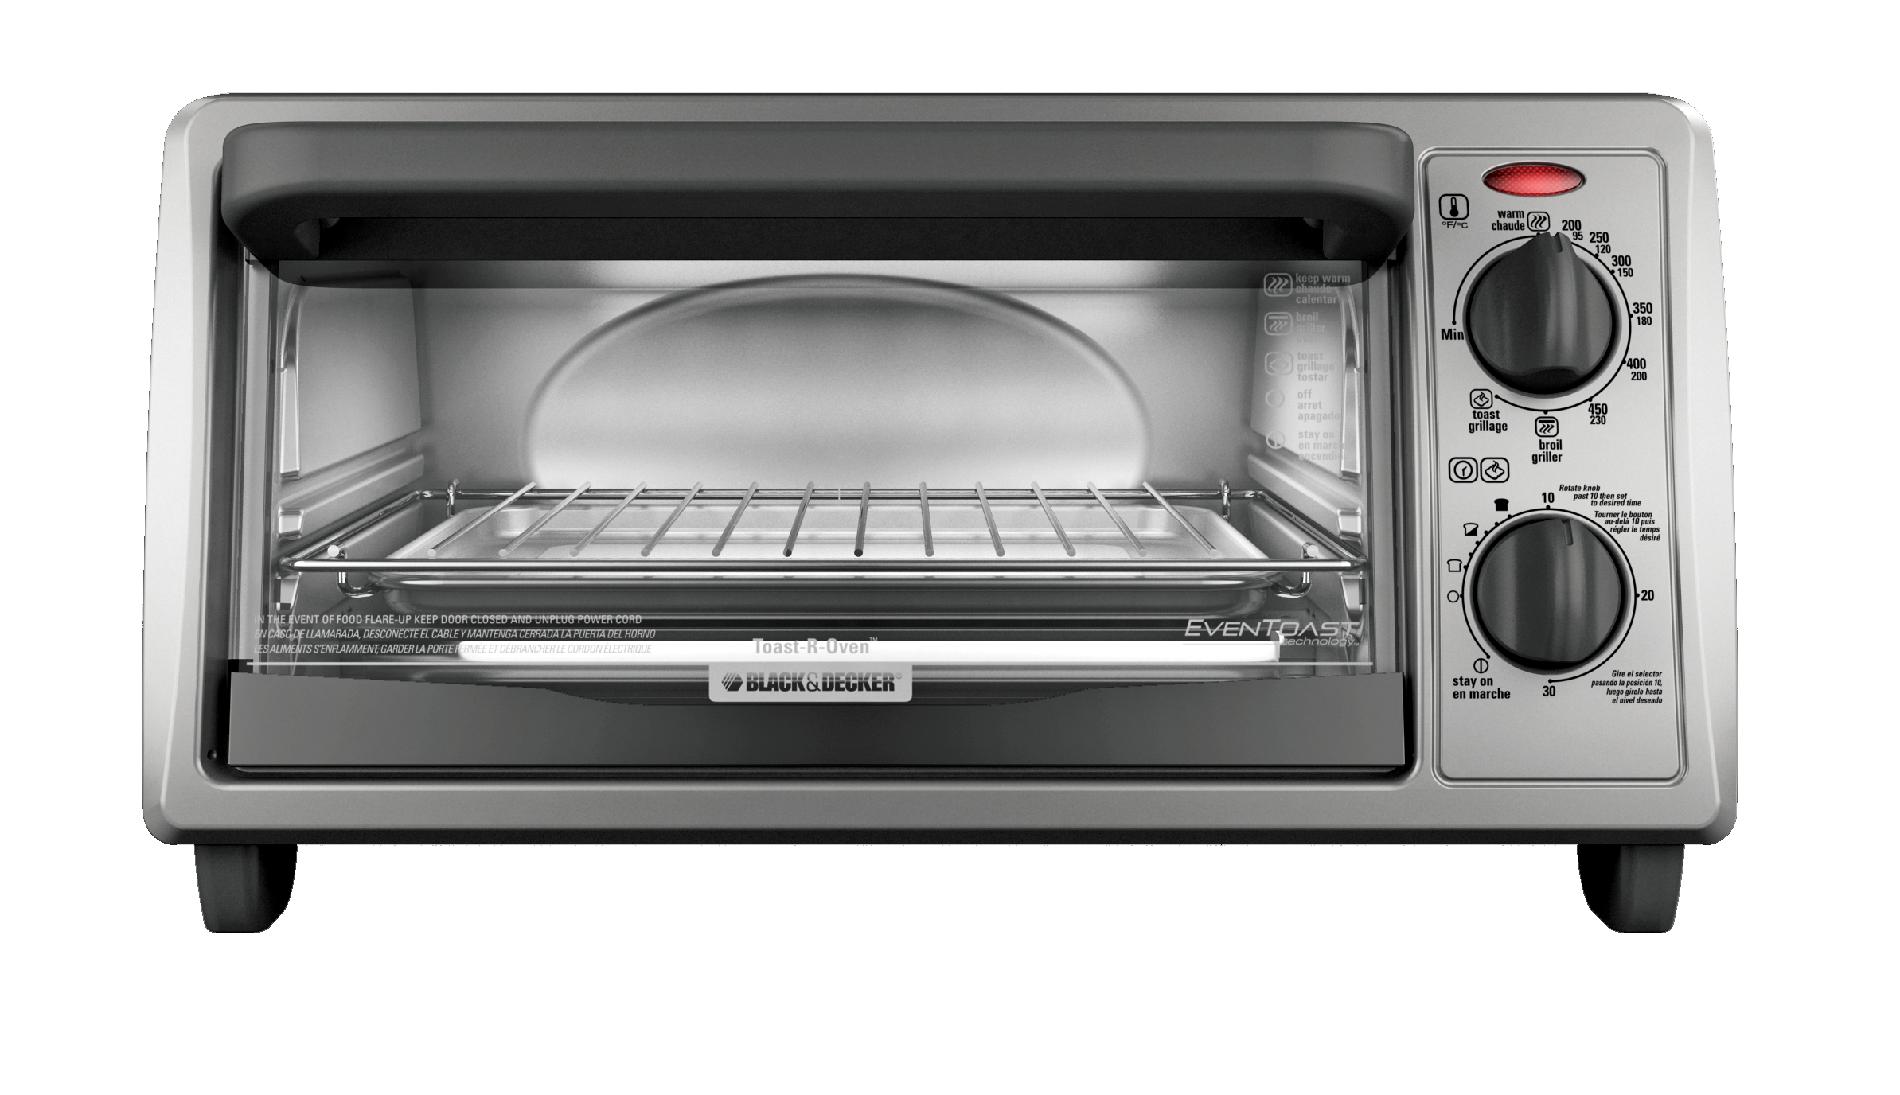 BLACK+DECKER TO1322SBD Toaster Oven, 4